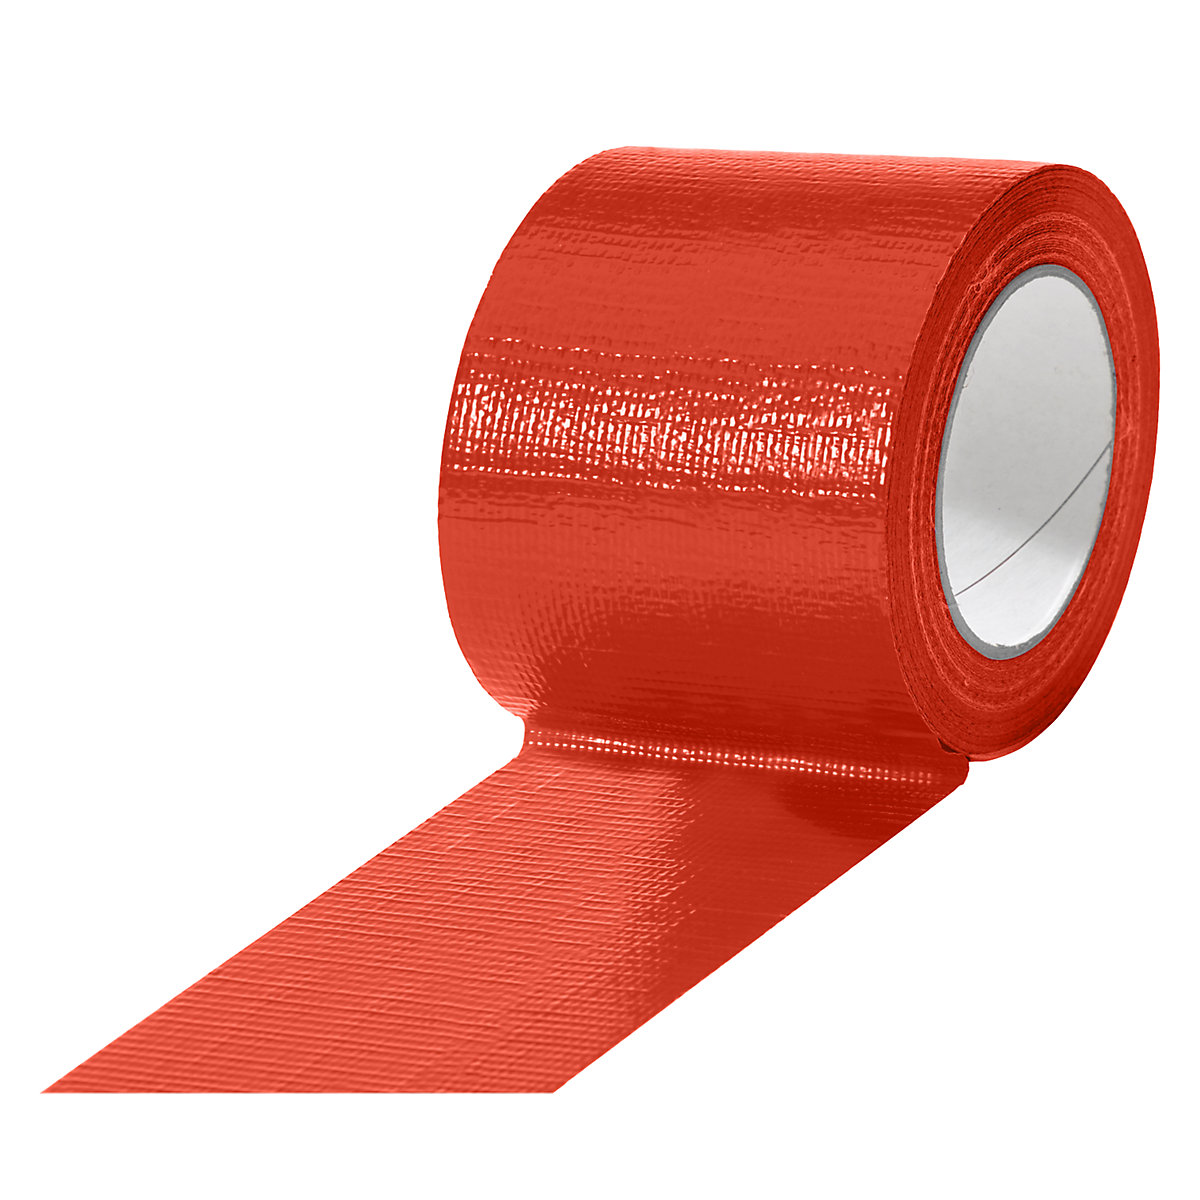 Fabric tape, in different colours, pack of 12 rolls, red, tape width 75 mm-3